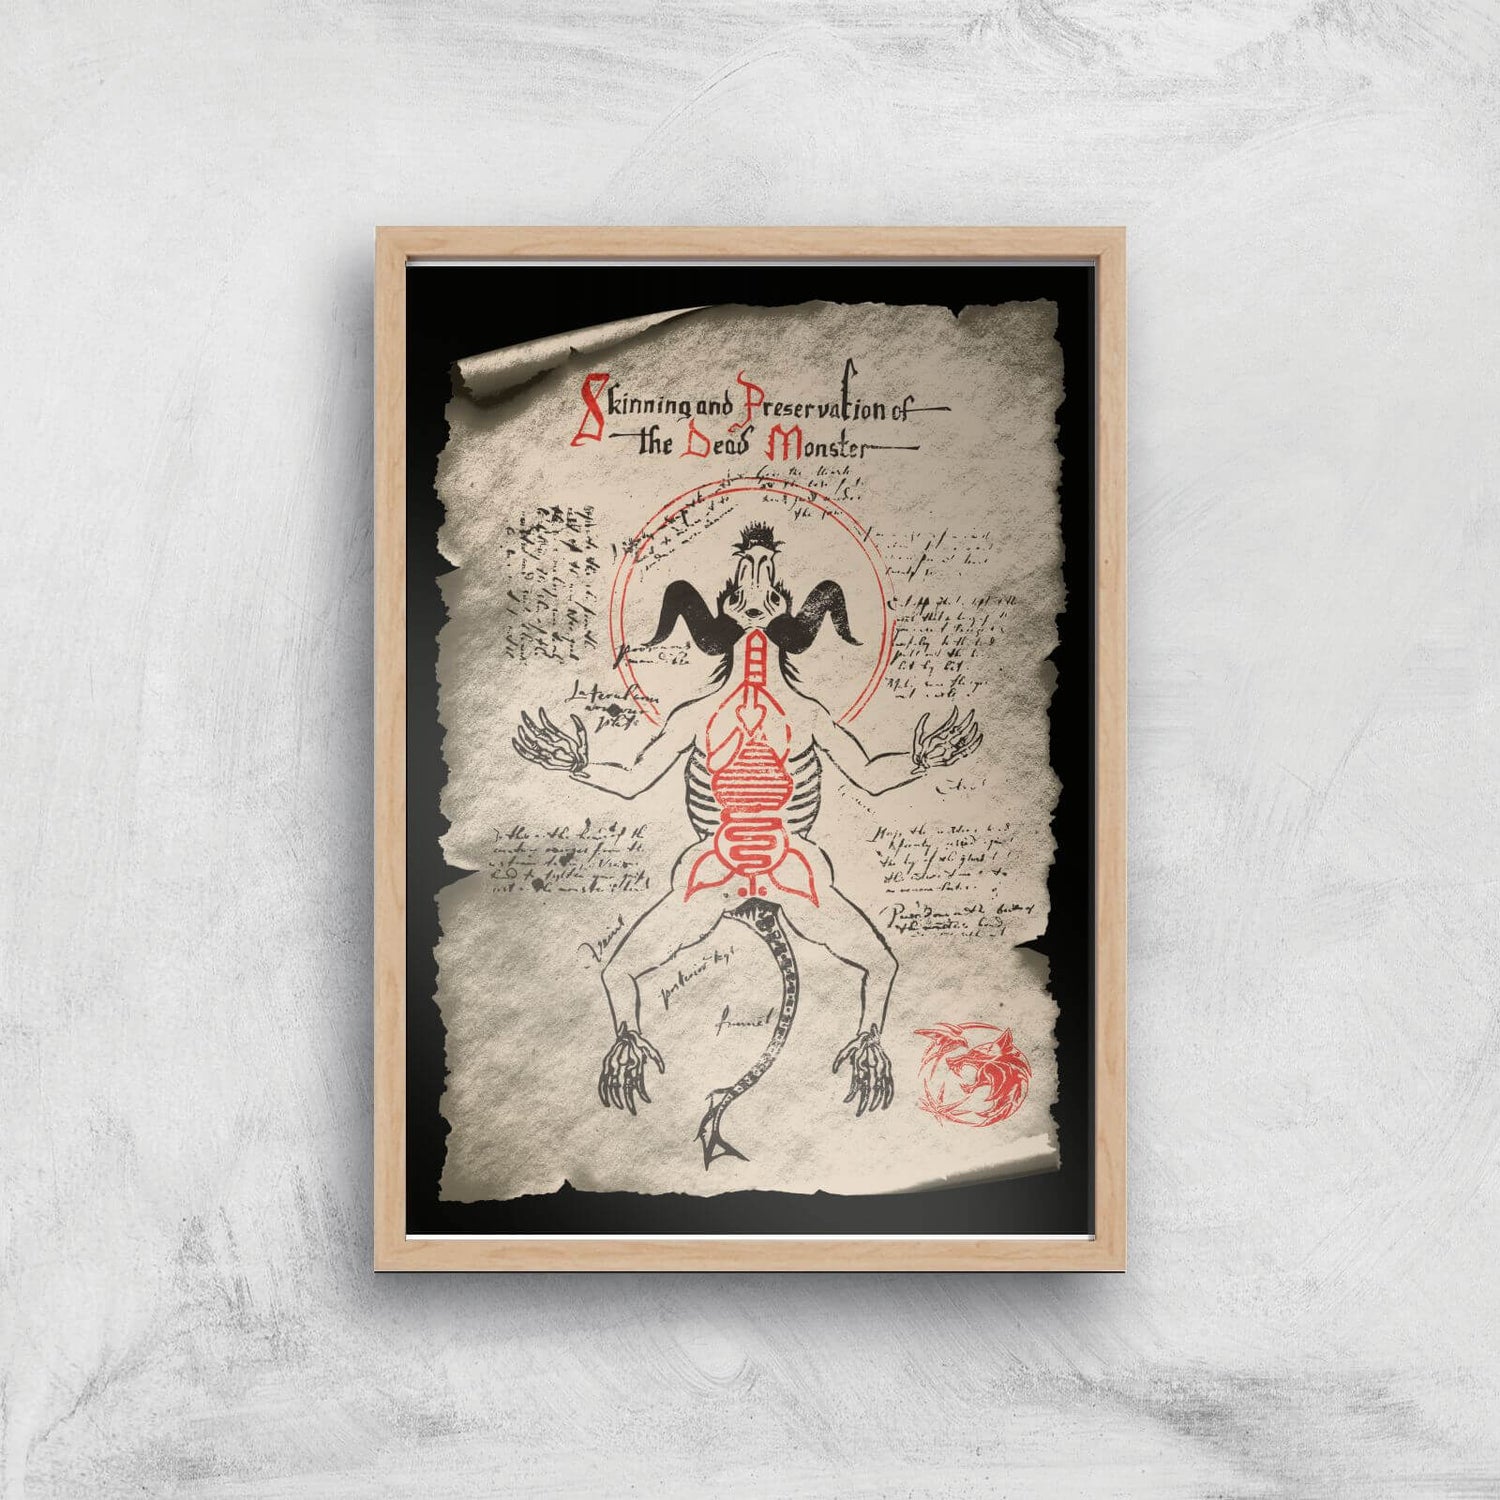 The Witcher Skinning And Preservation Of The Dead Monster Giclee Art Print - A3 - Wooden Frame